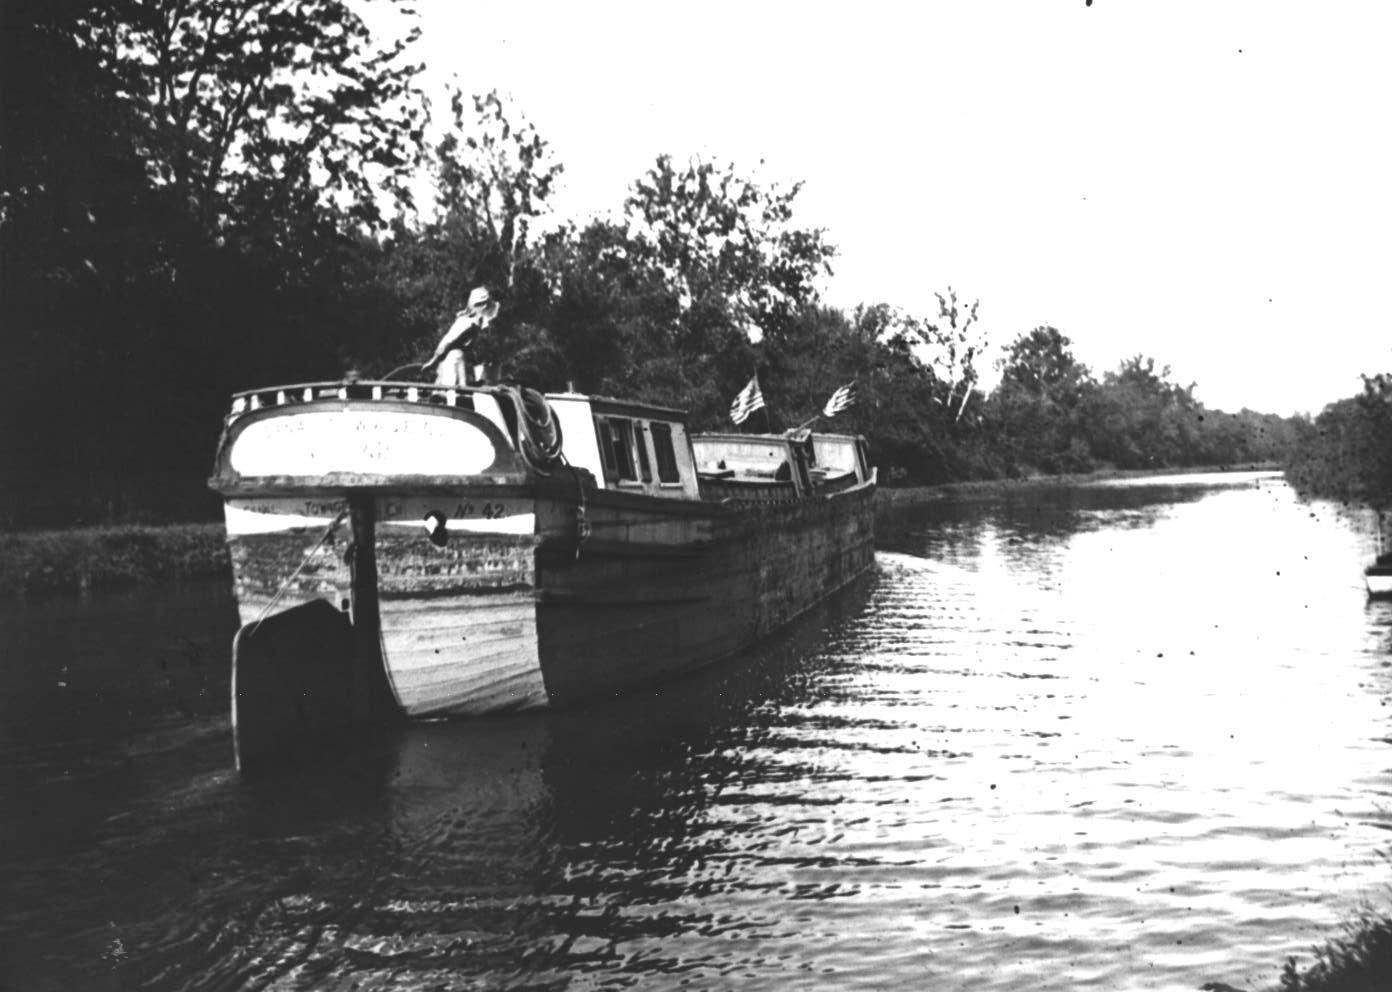 Many families called their boats on the canal home and thus the entire family operated a boat together. The mother often worked as tiller steering the boat along the canal.